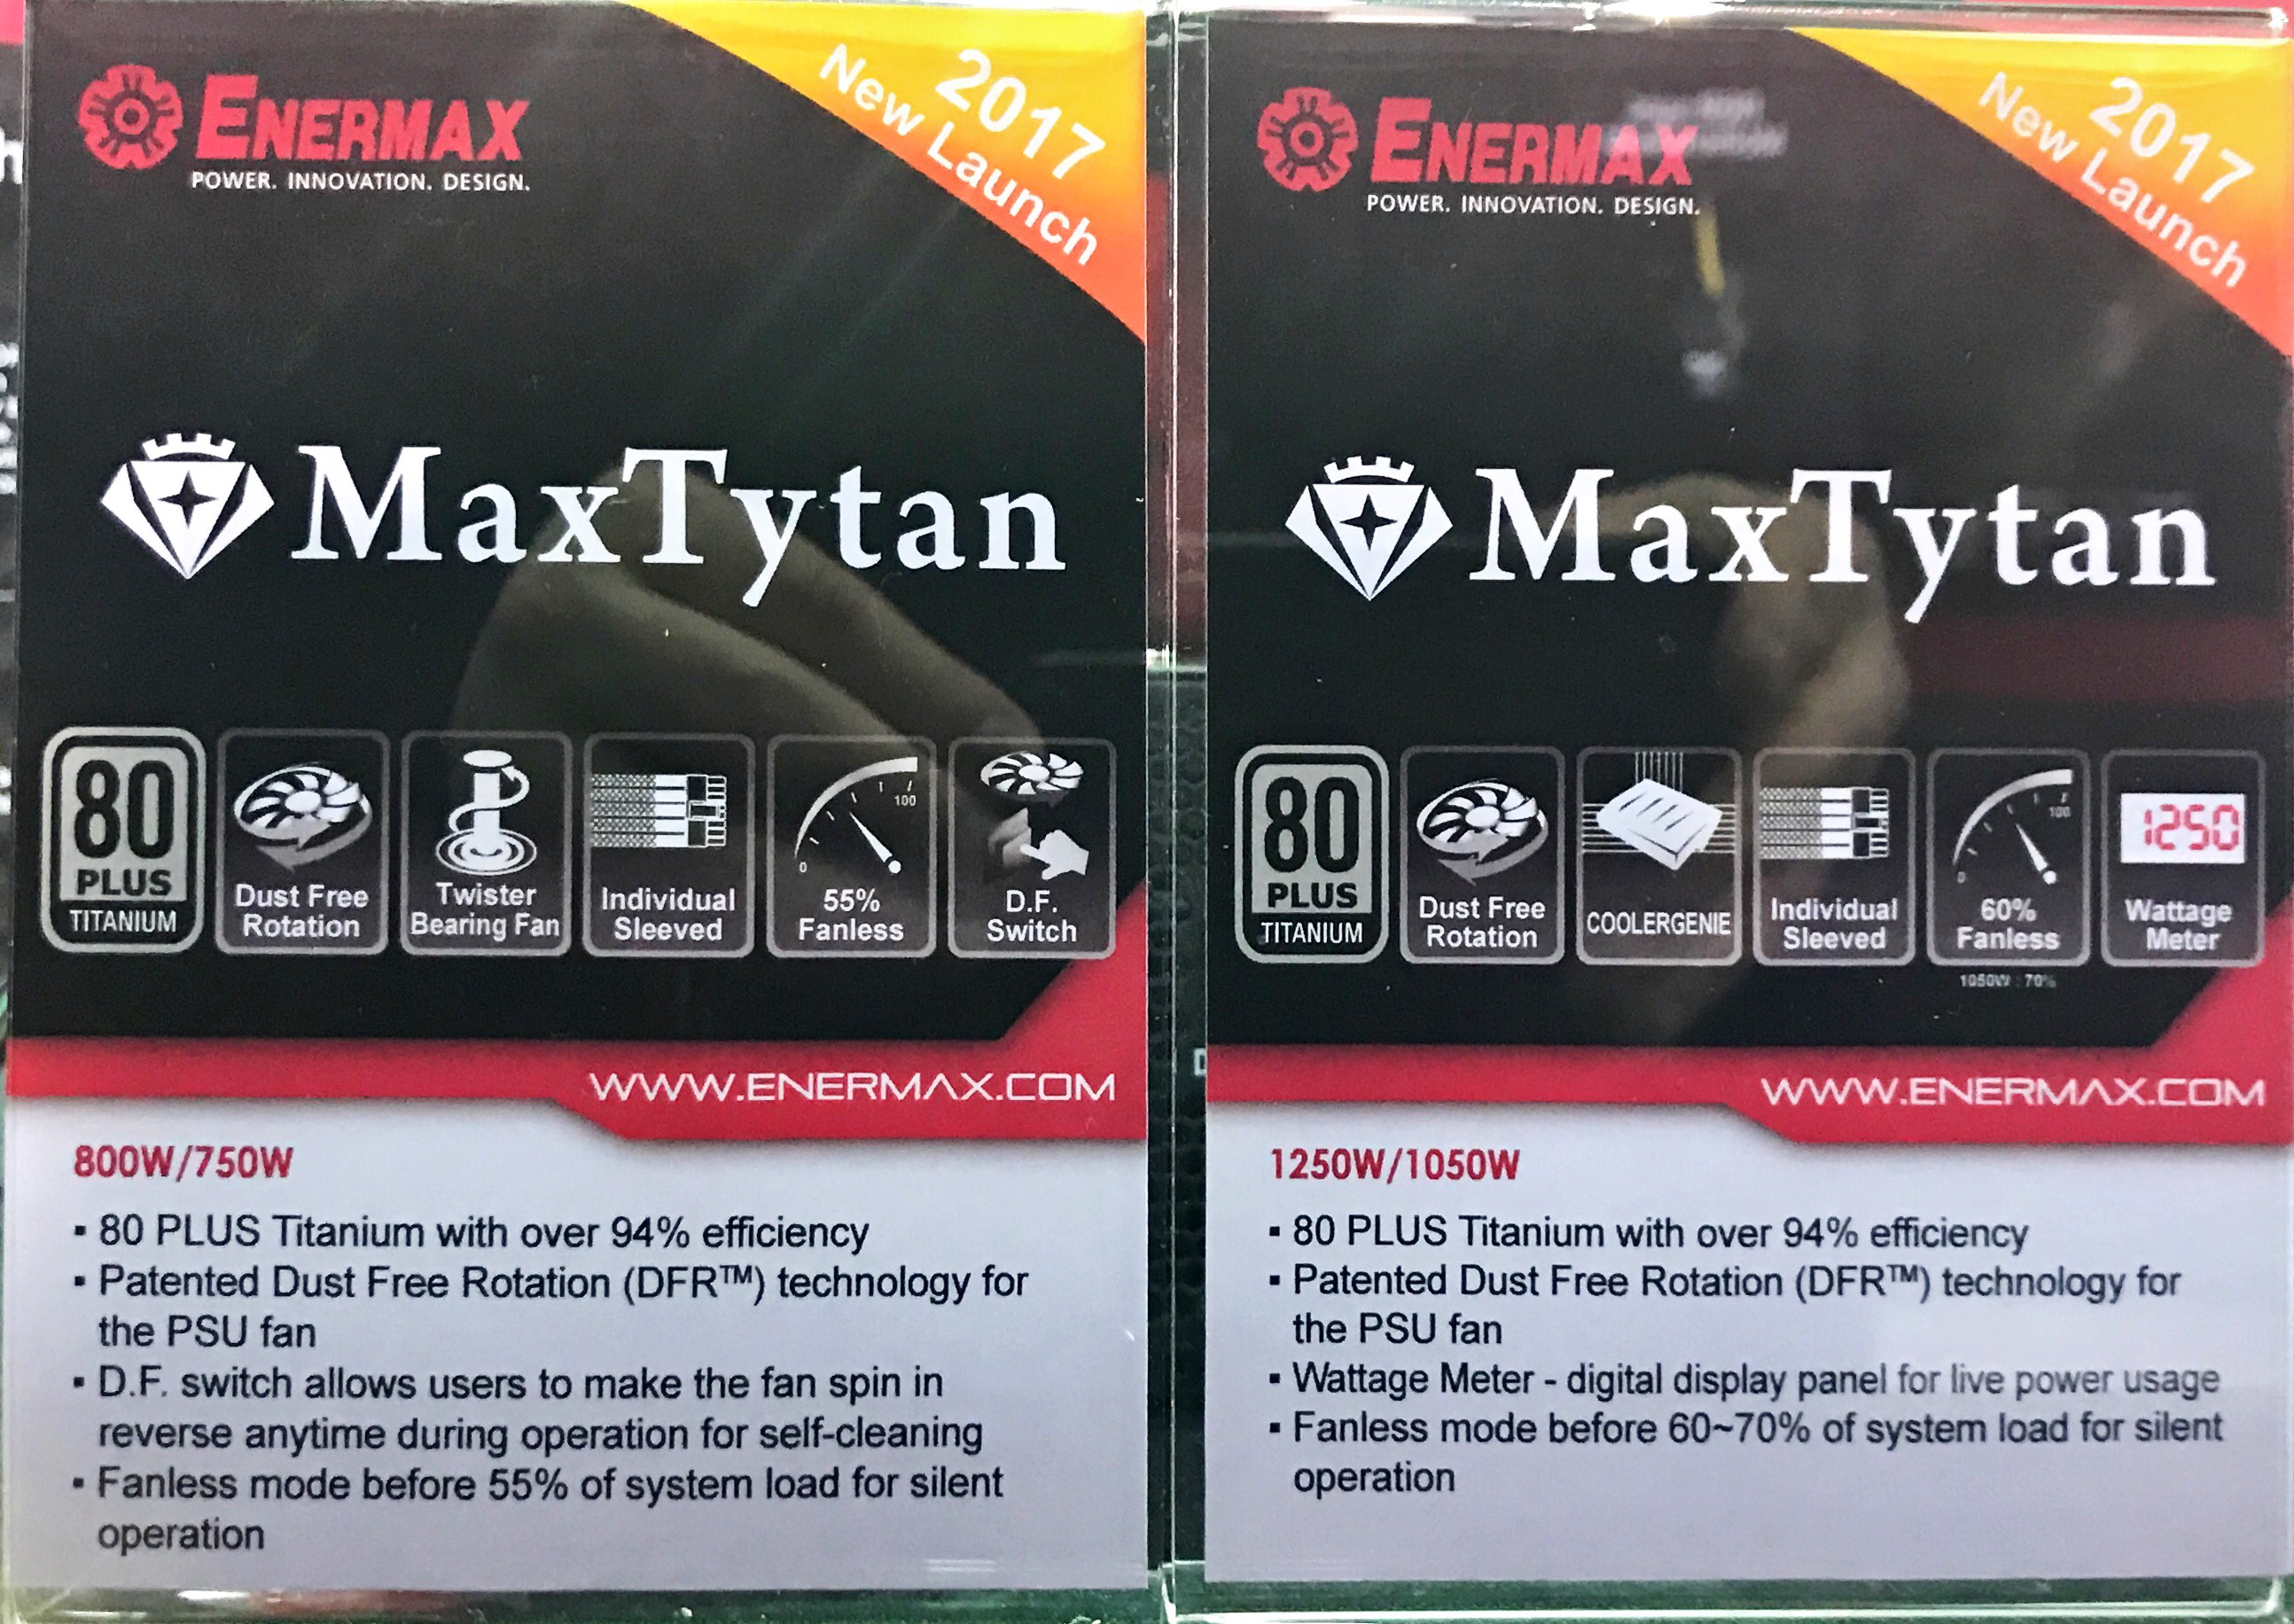 Enermax Launches MaxTytan: 80 Plus Titanium, Up to 1250 W, Integrated Power  Meter